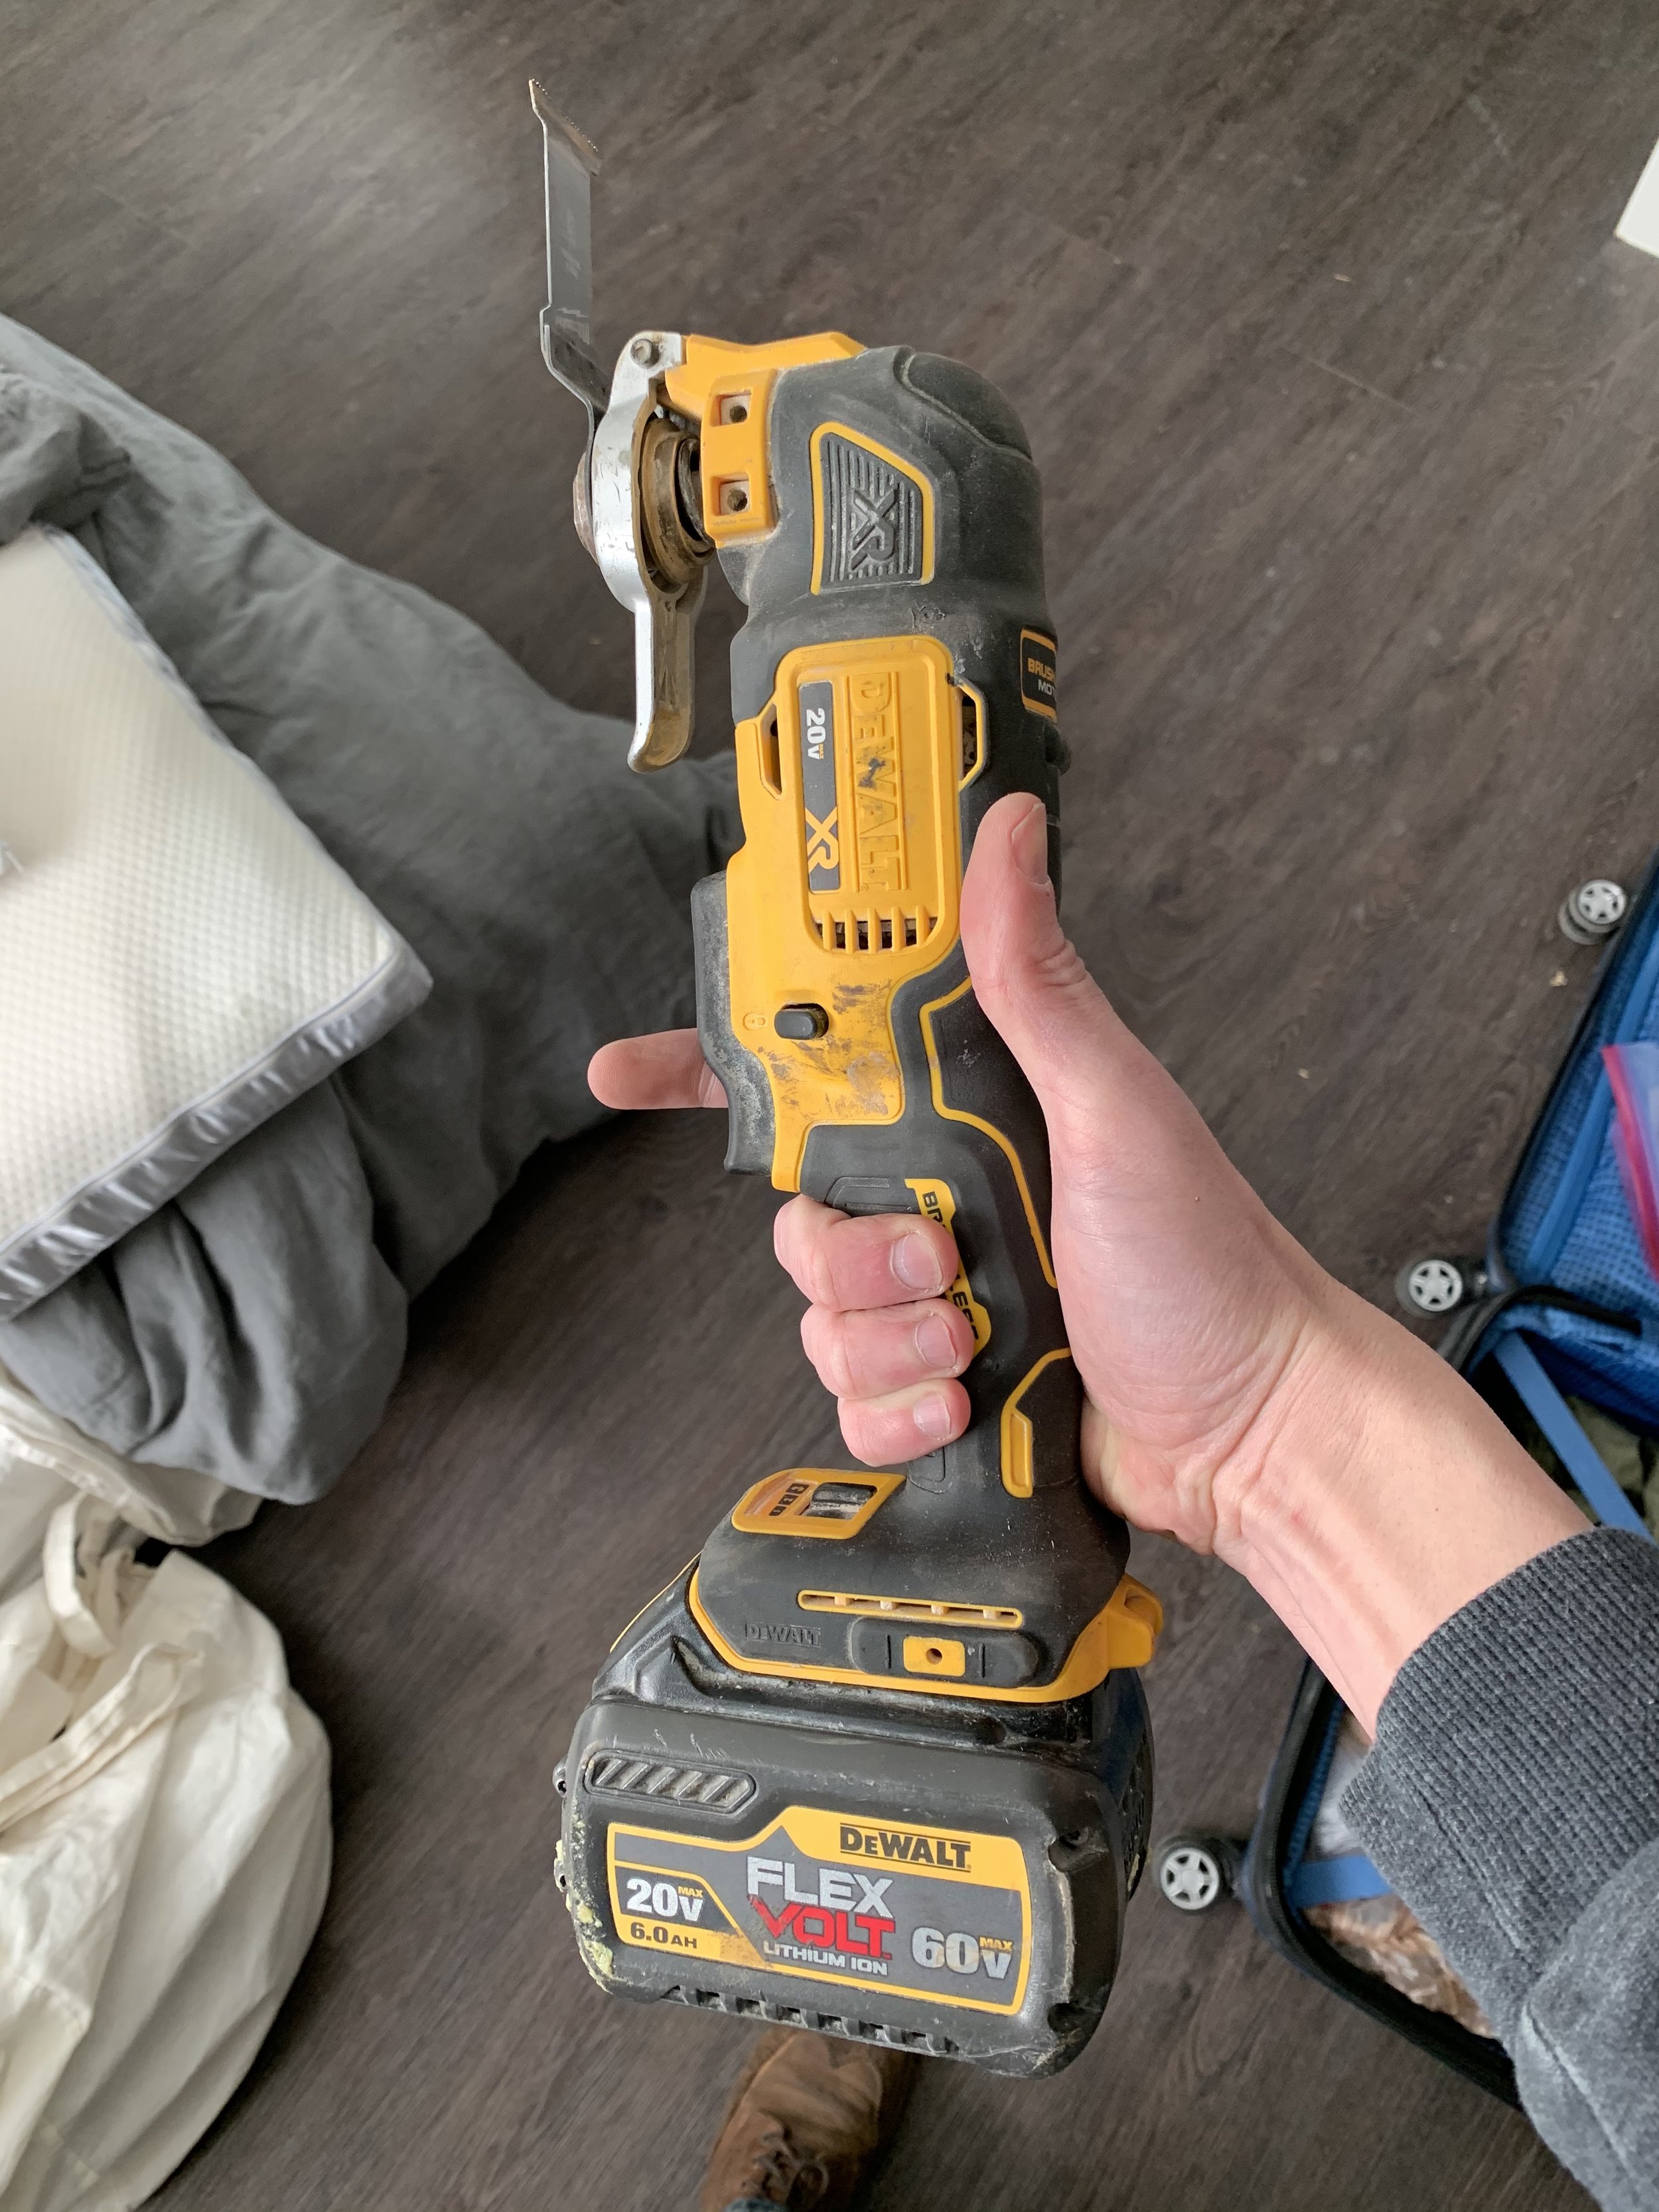 Found: Expensive Tool